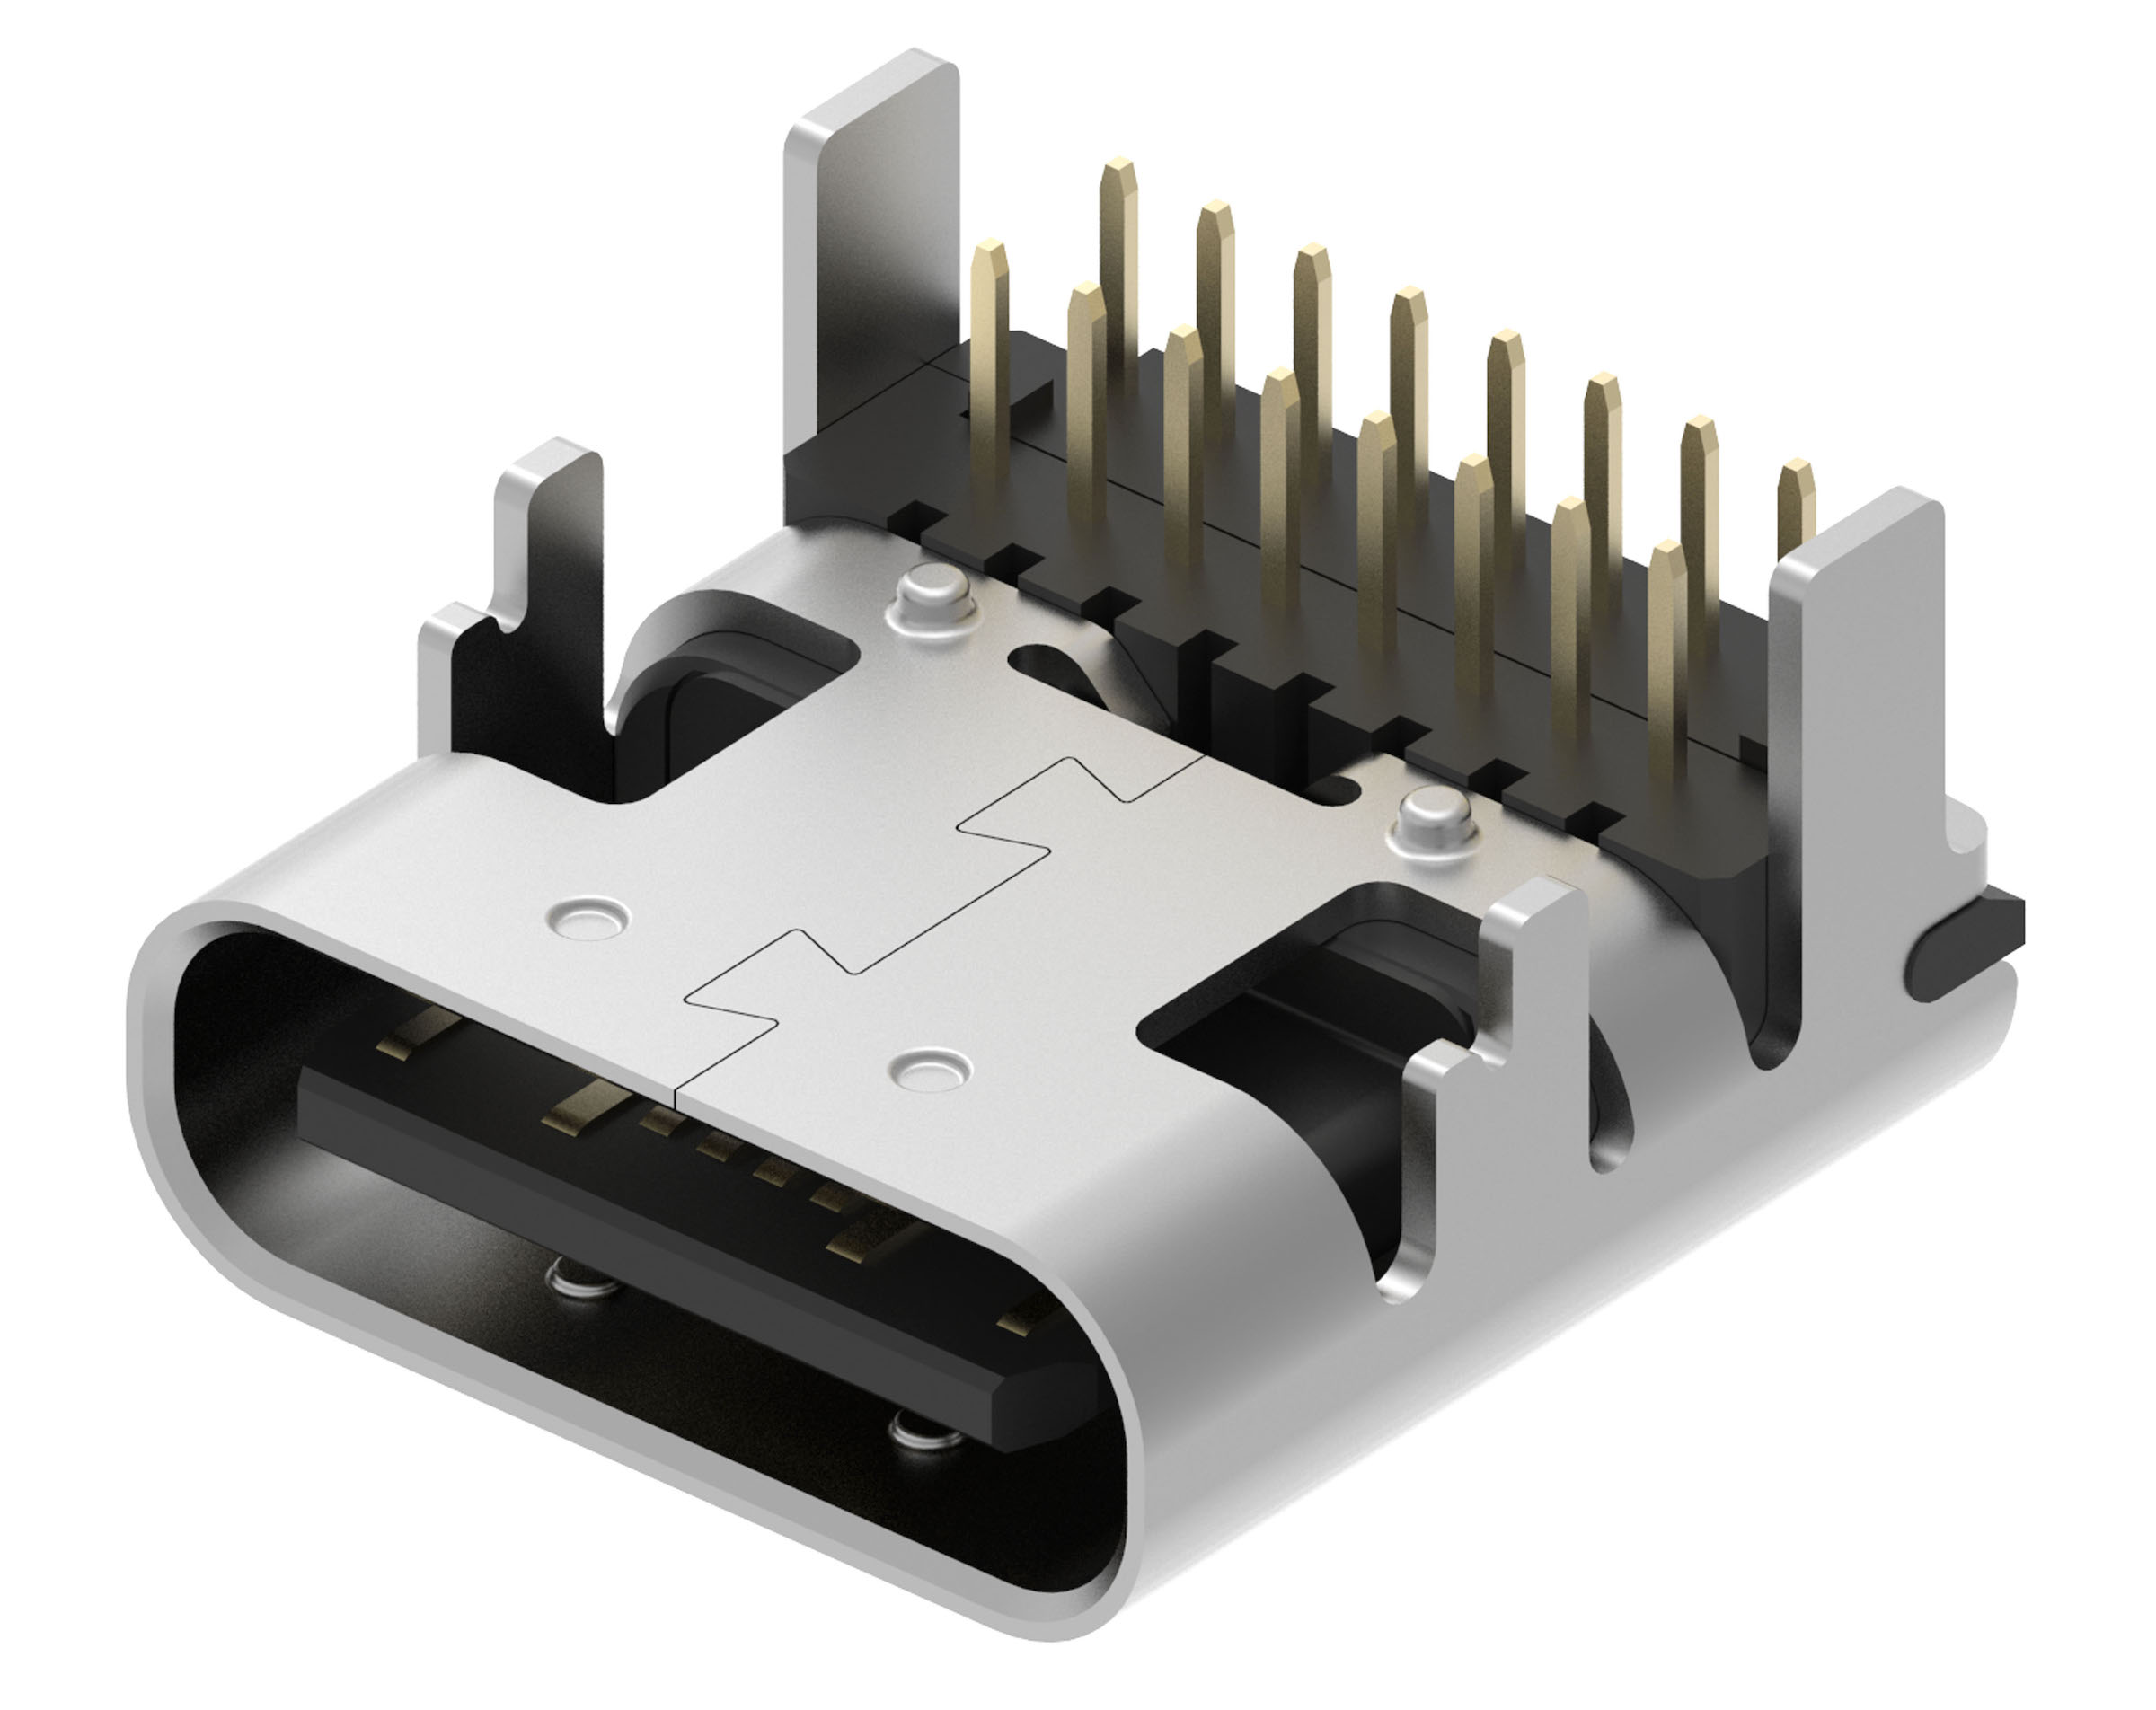 Smart home connectors from GCT